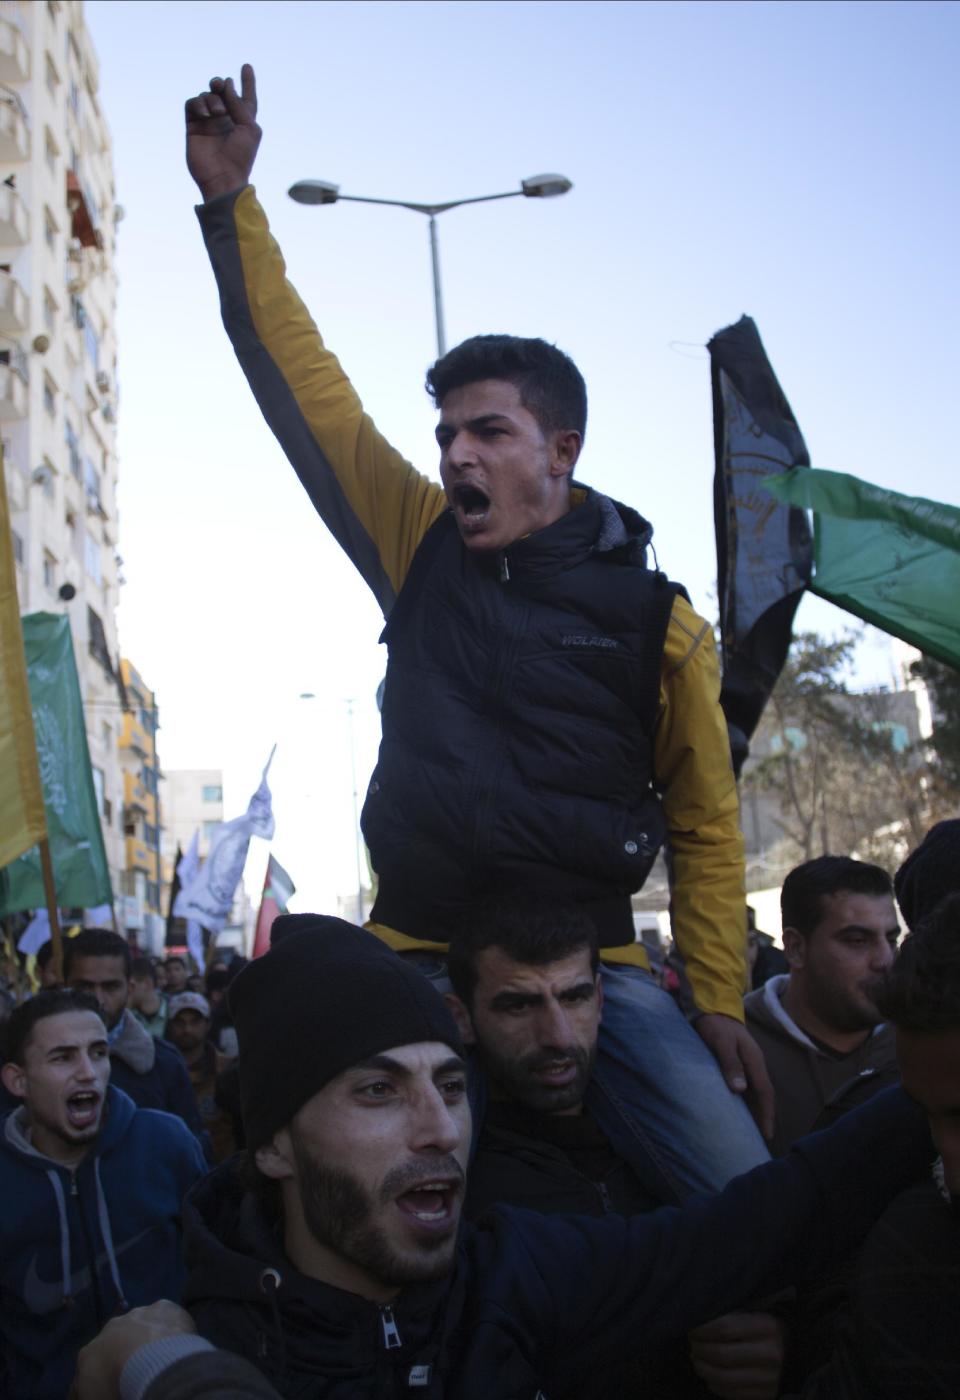 Palestinians chant angry slogans as they attend a symbolic funeral of a missing fisherman, Mohammed Al-Hissi, 33, in Gaza City, Saturday, Jan. 7, 2017. The family of a Palestinian fisherman who disappeared after boat collision with an Israeli navy vessel off Gaza coast declared him dead Saturday after three days of search, accusing the Israeli military of deliberately sinking the fishing boat. (AP Photo/Khalil Hamra)